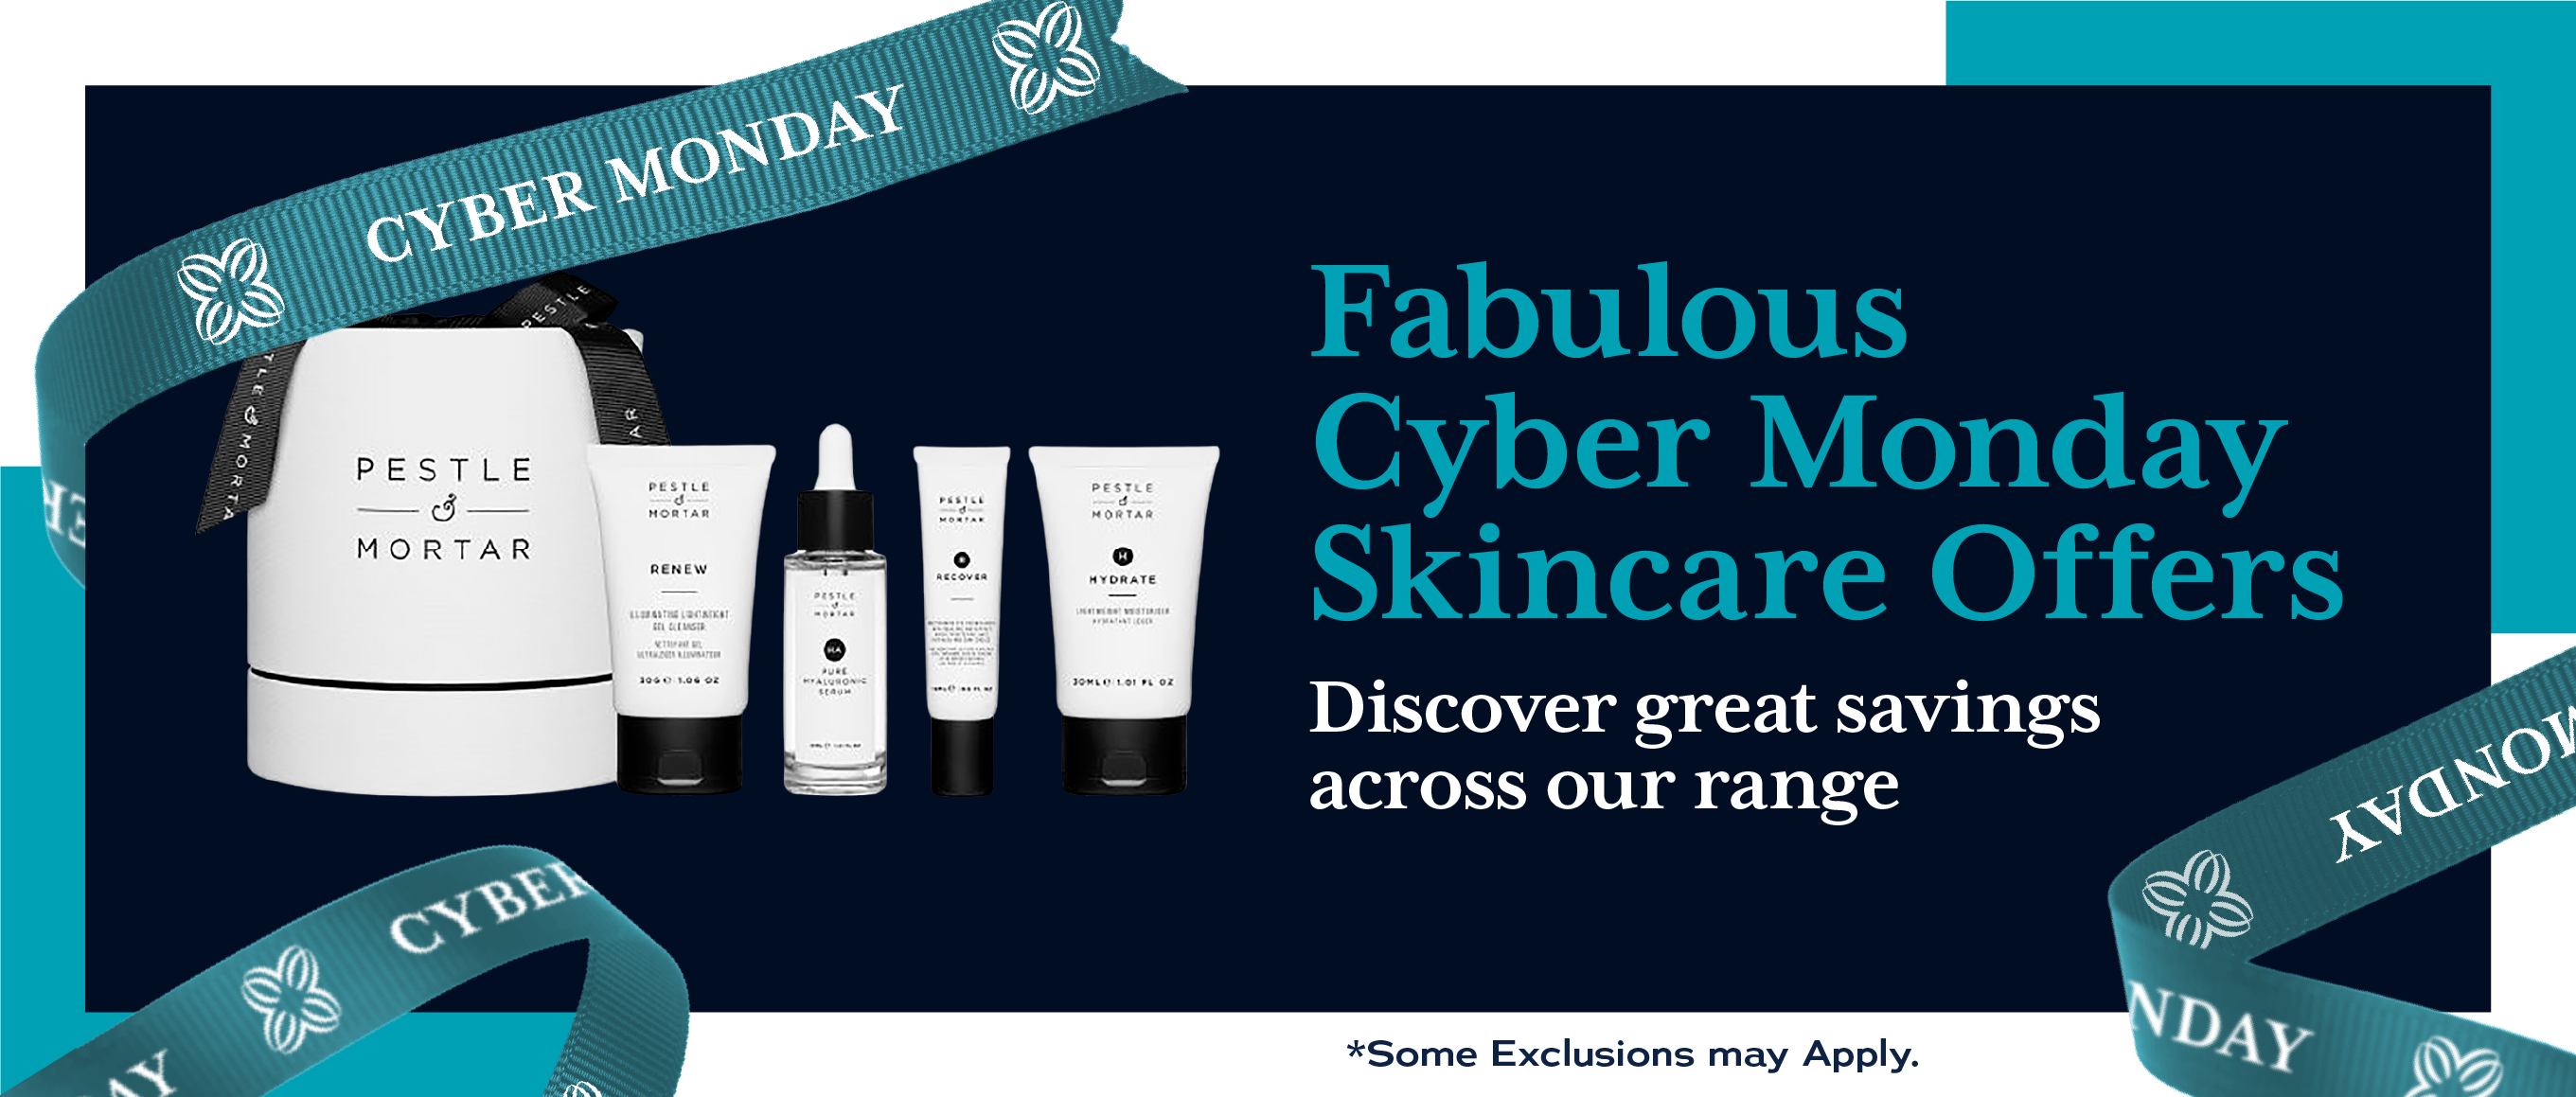 Cyber Monday Skincare Offers